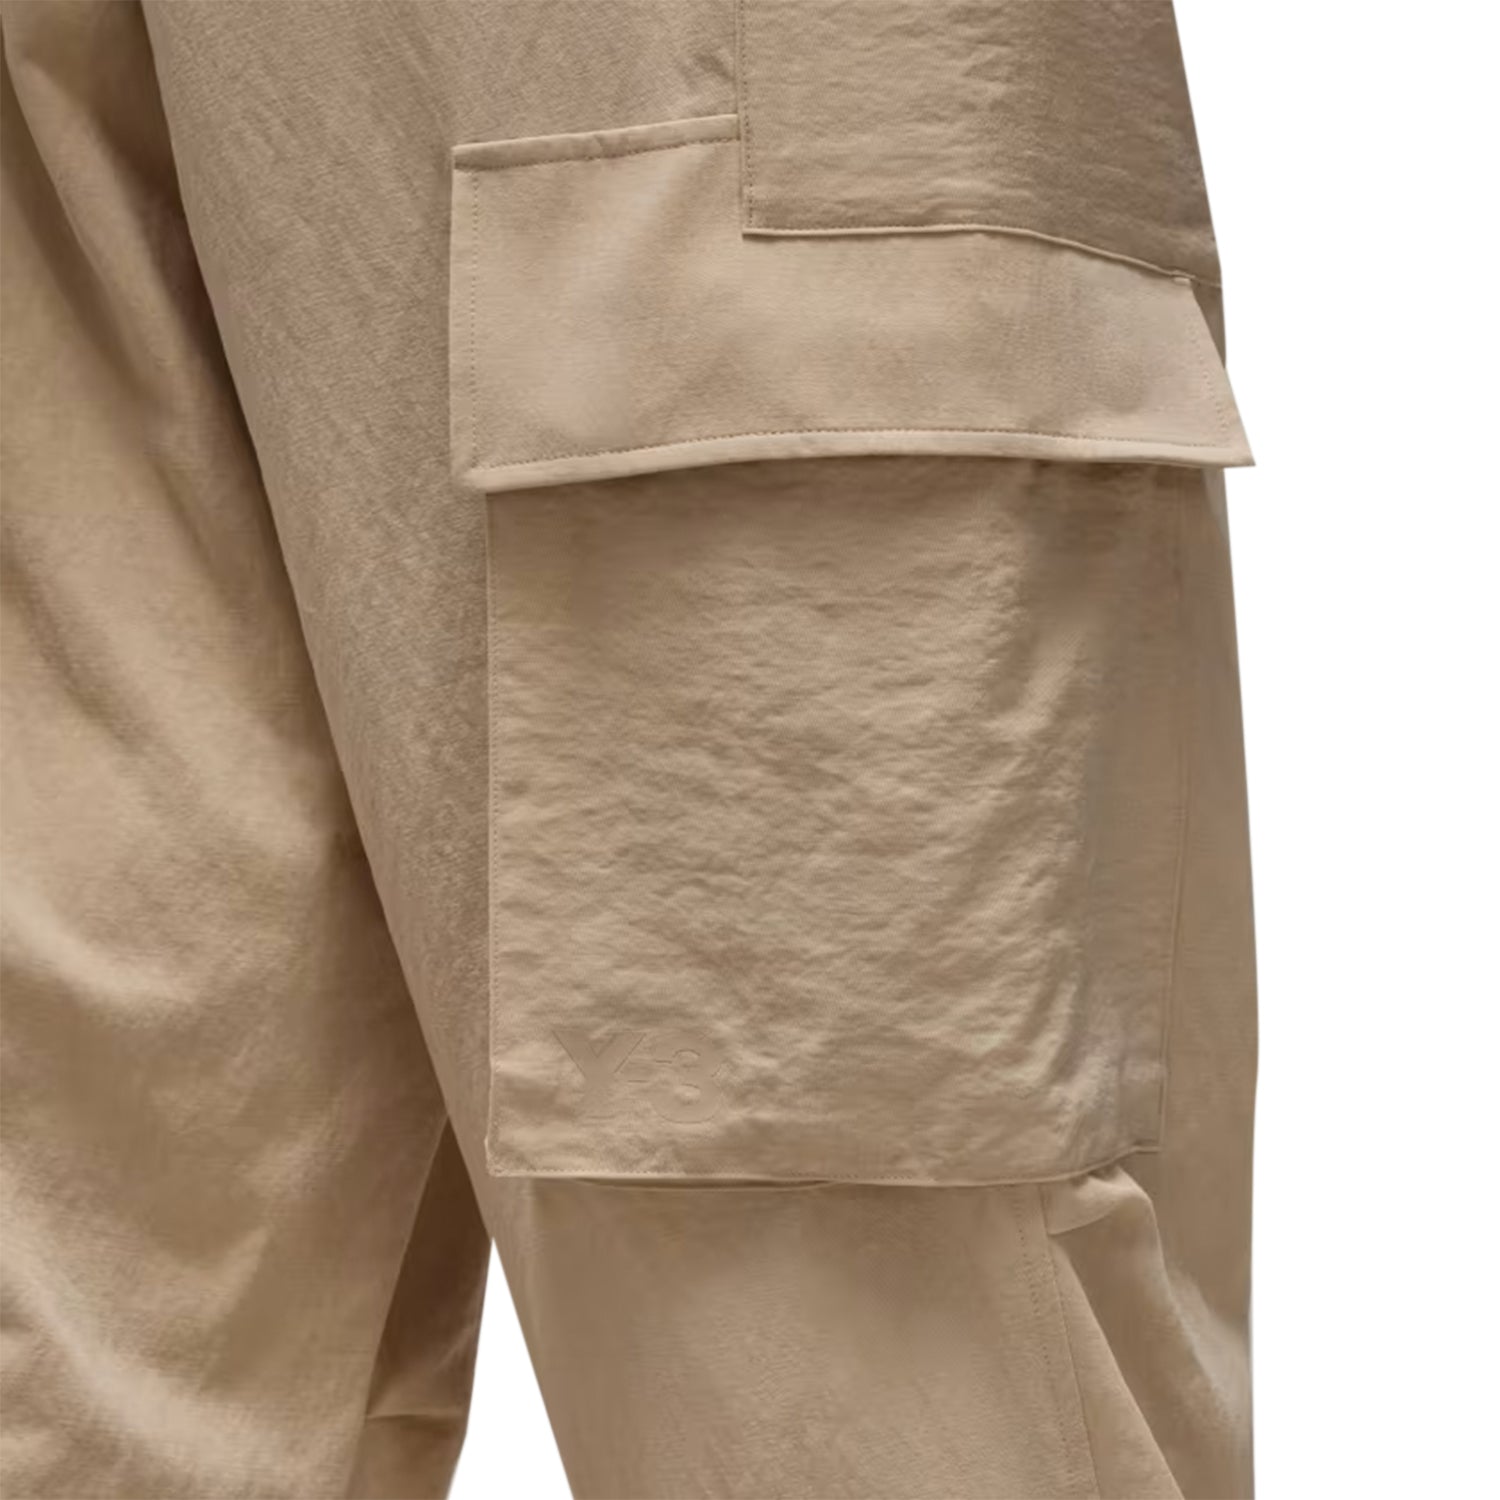 Y-3 Washed Twill Cuffed Cargo Pants - INVINCIBLE